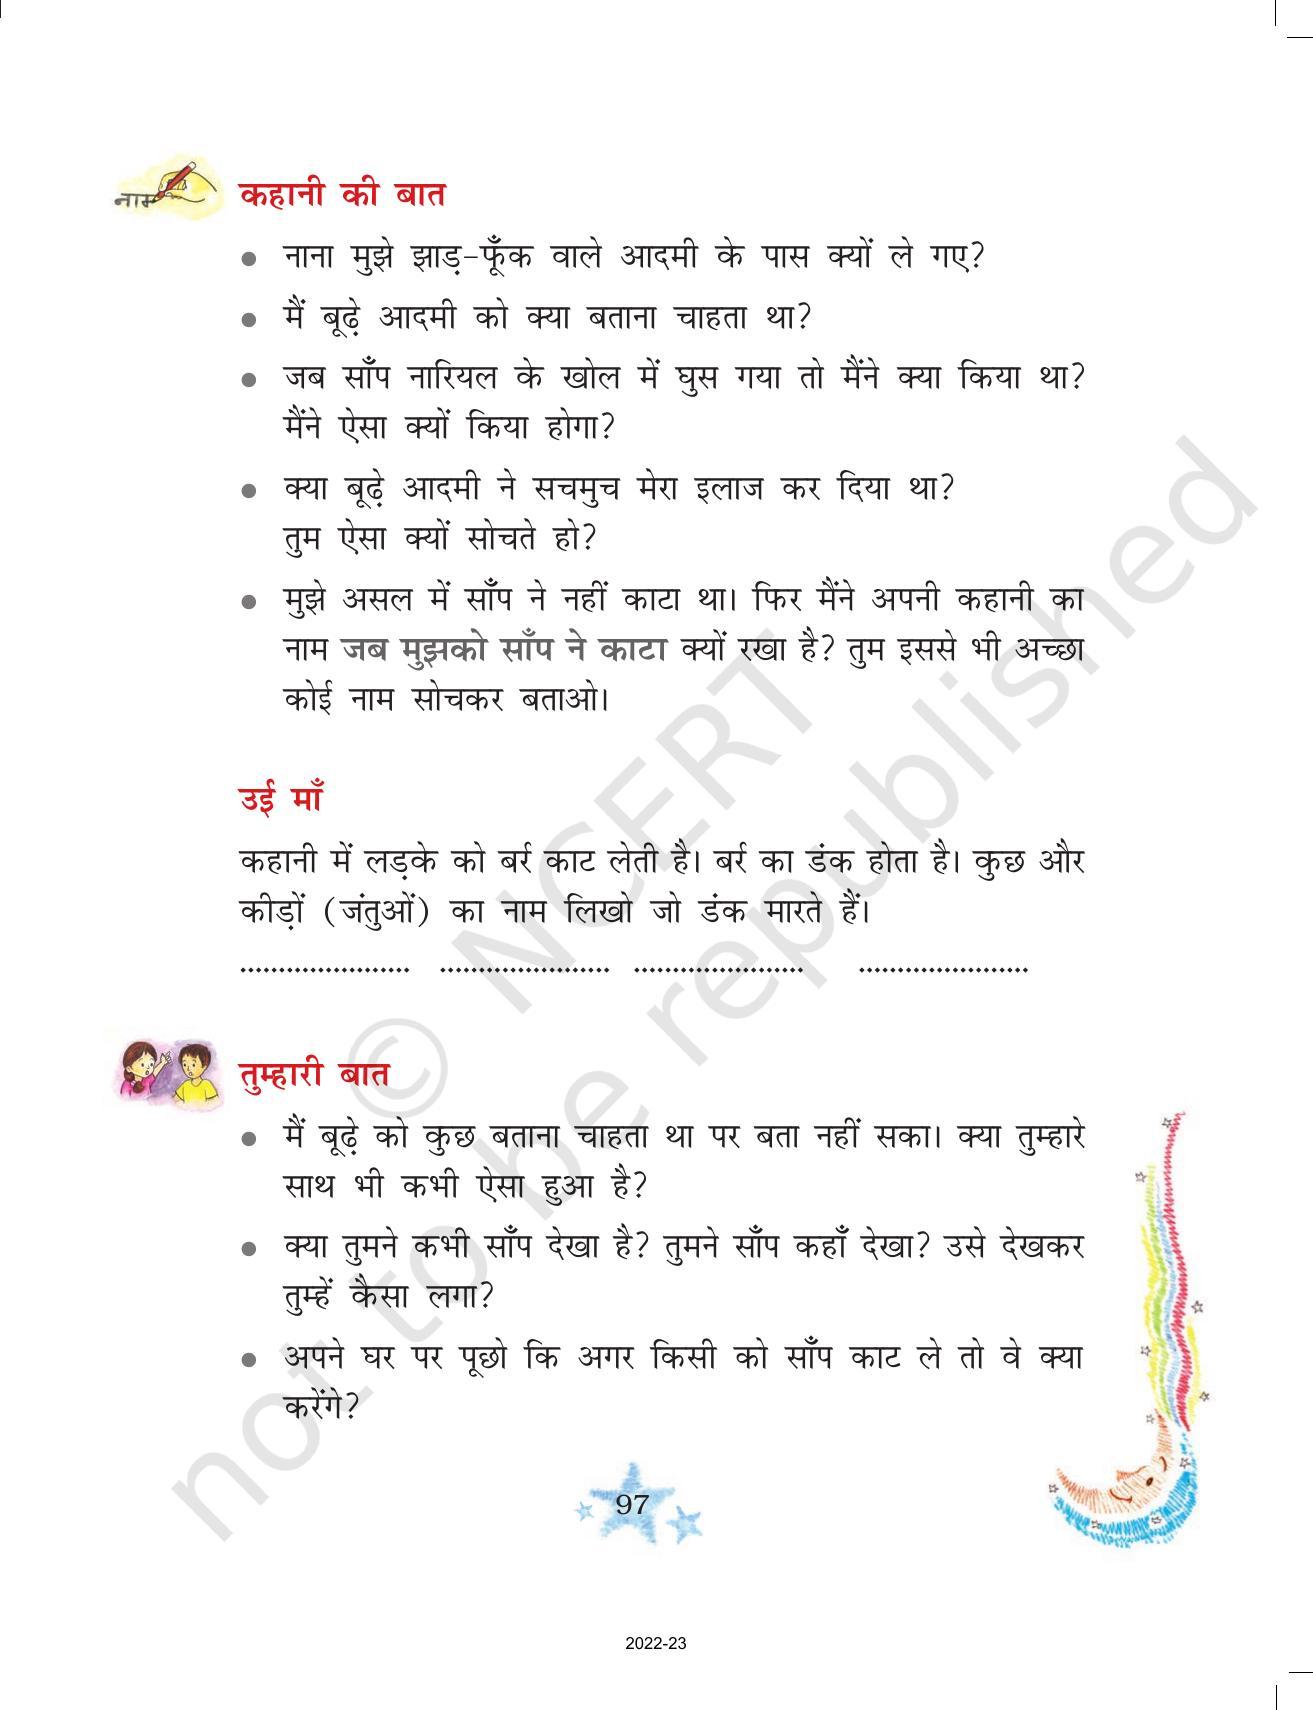 NCERT Book for Class 3 Hindi Chapter 10-जब मुझे साँप ने काटा - Page 5